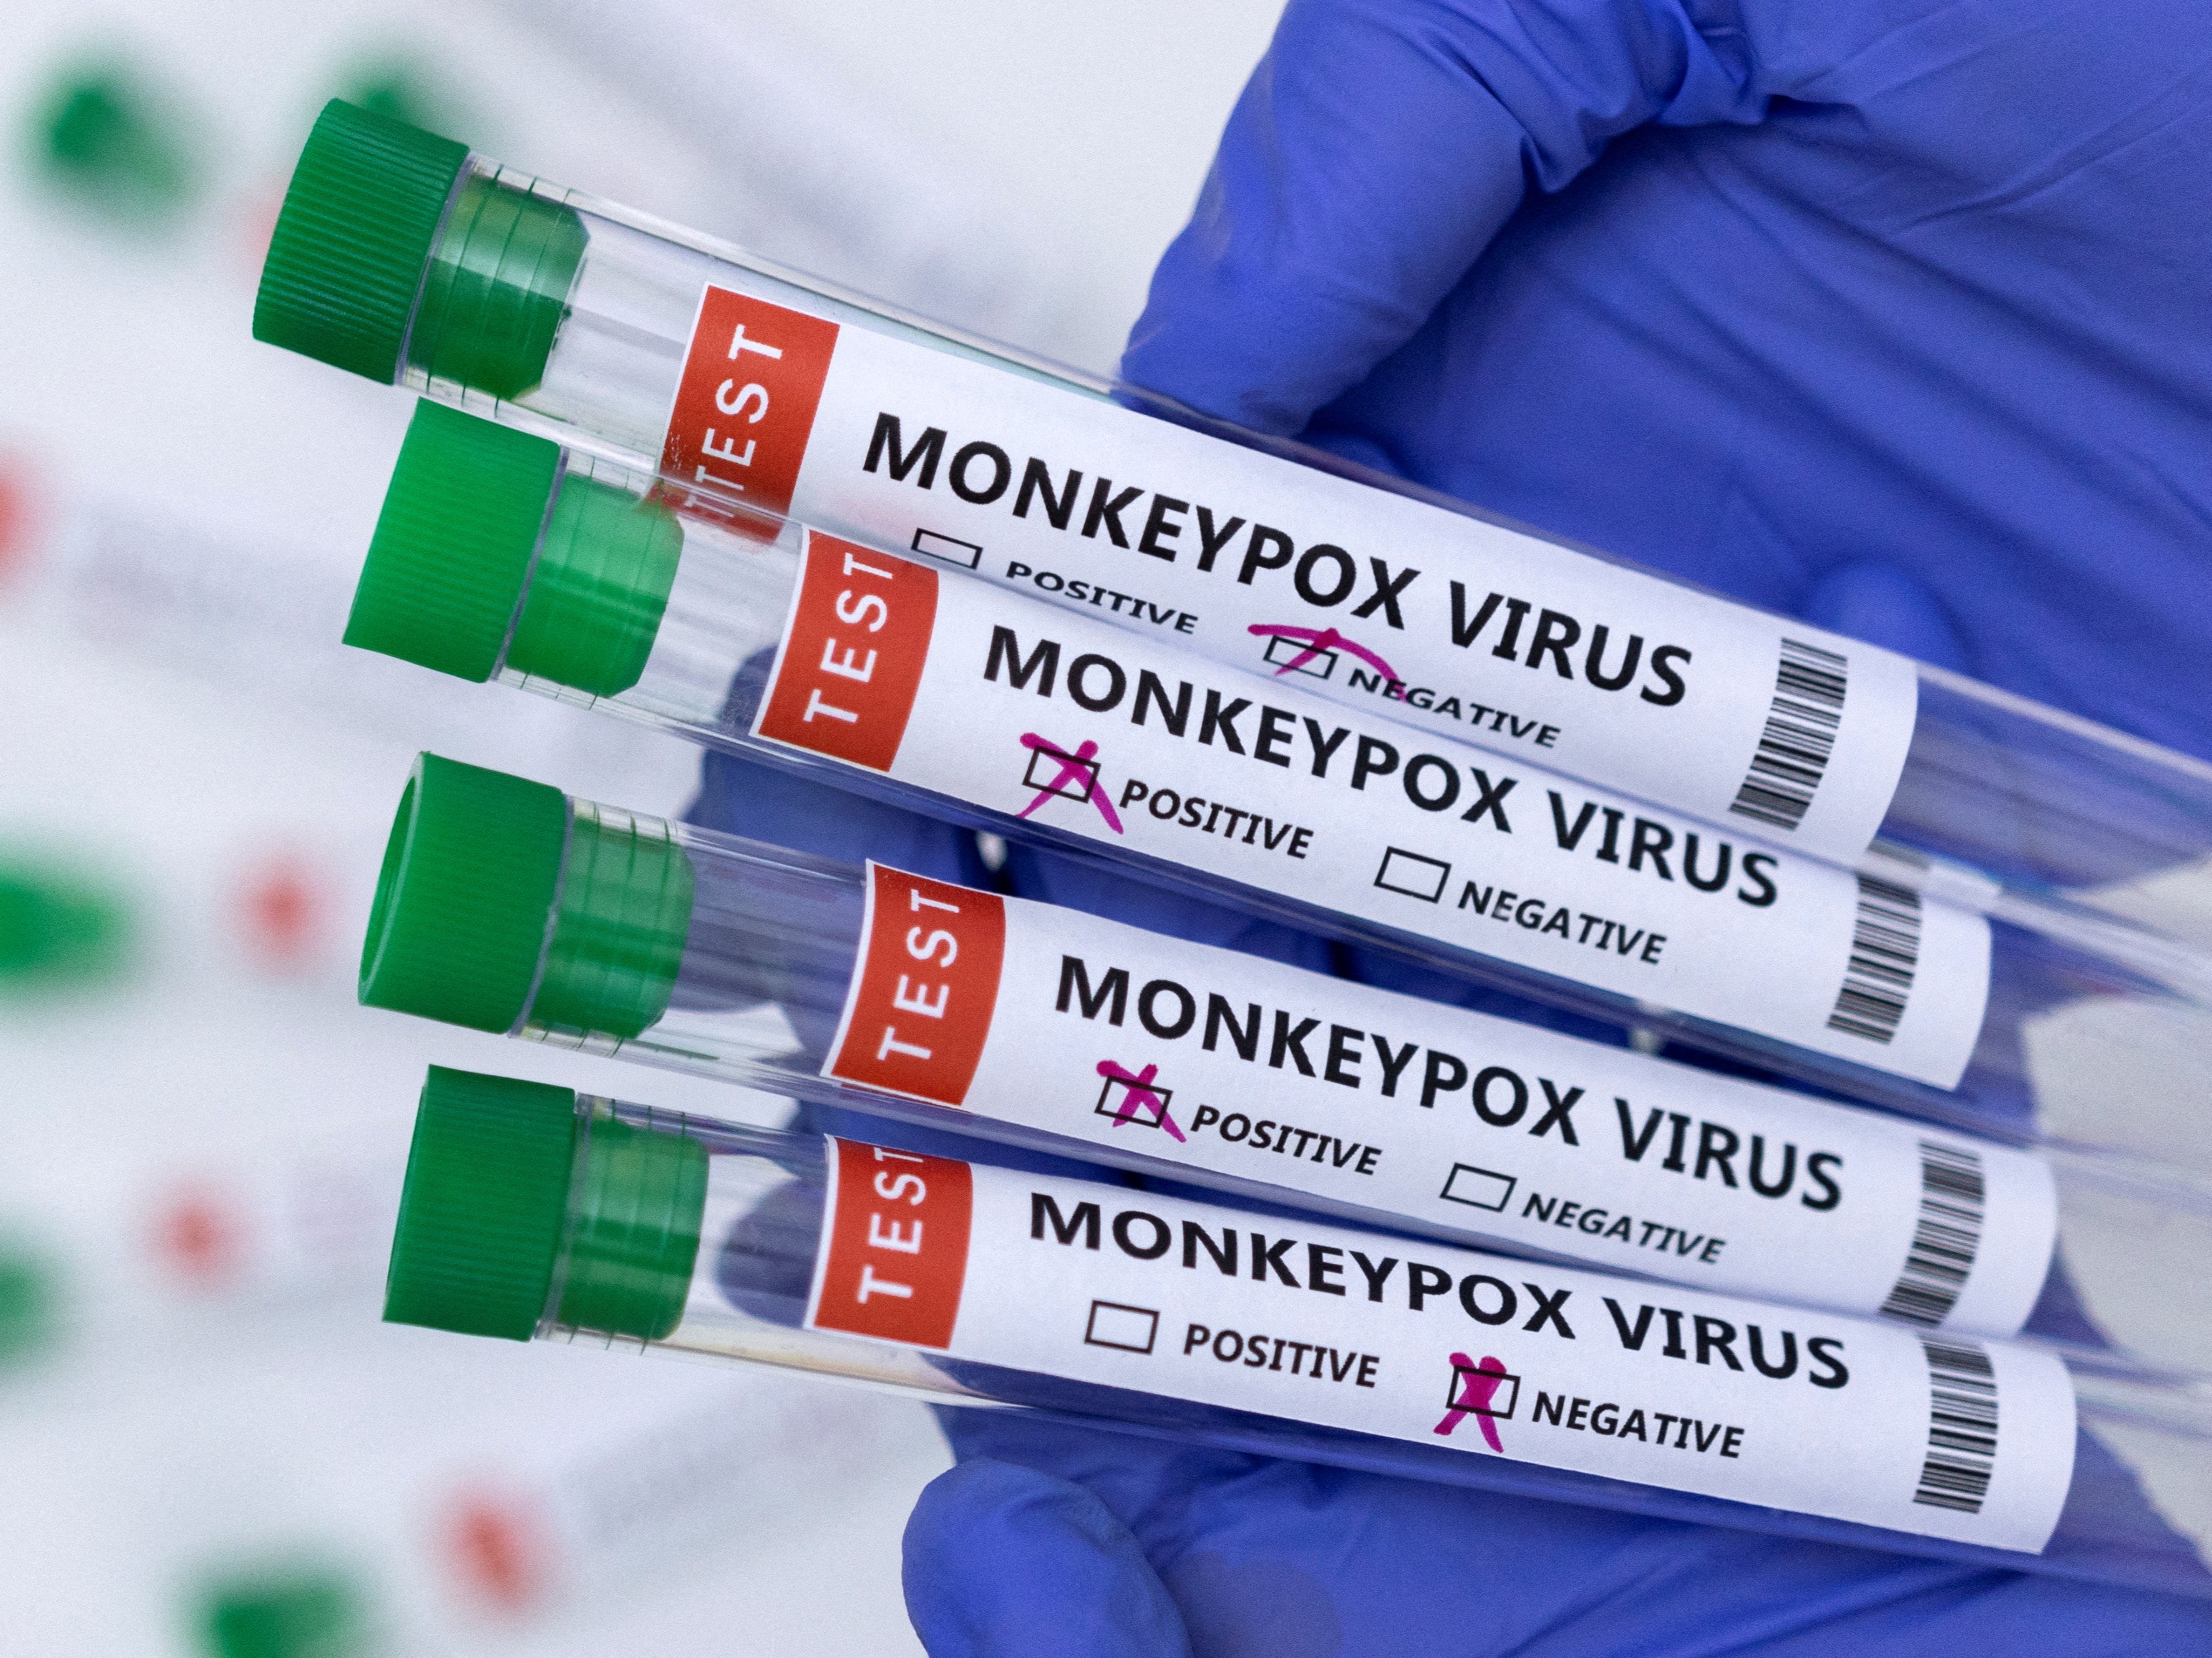 The highest number of monkeypox cases reported to the World Health Organisation have been from the UK